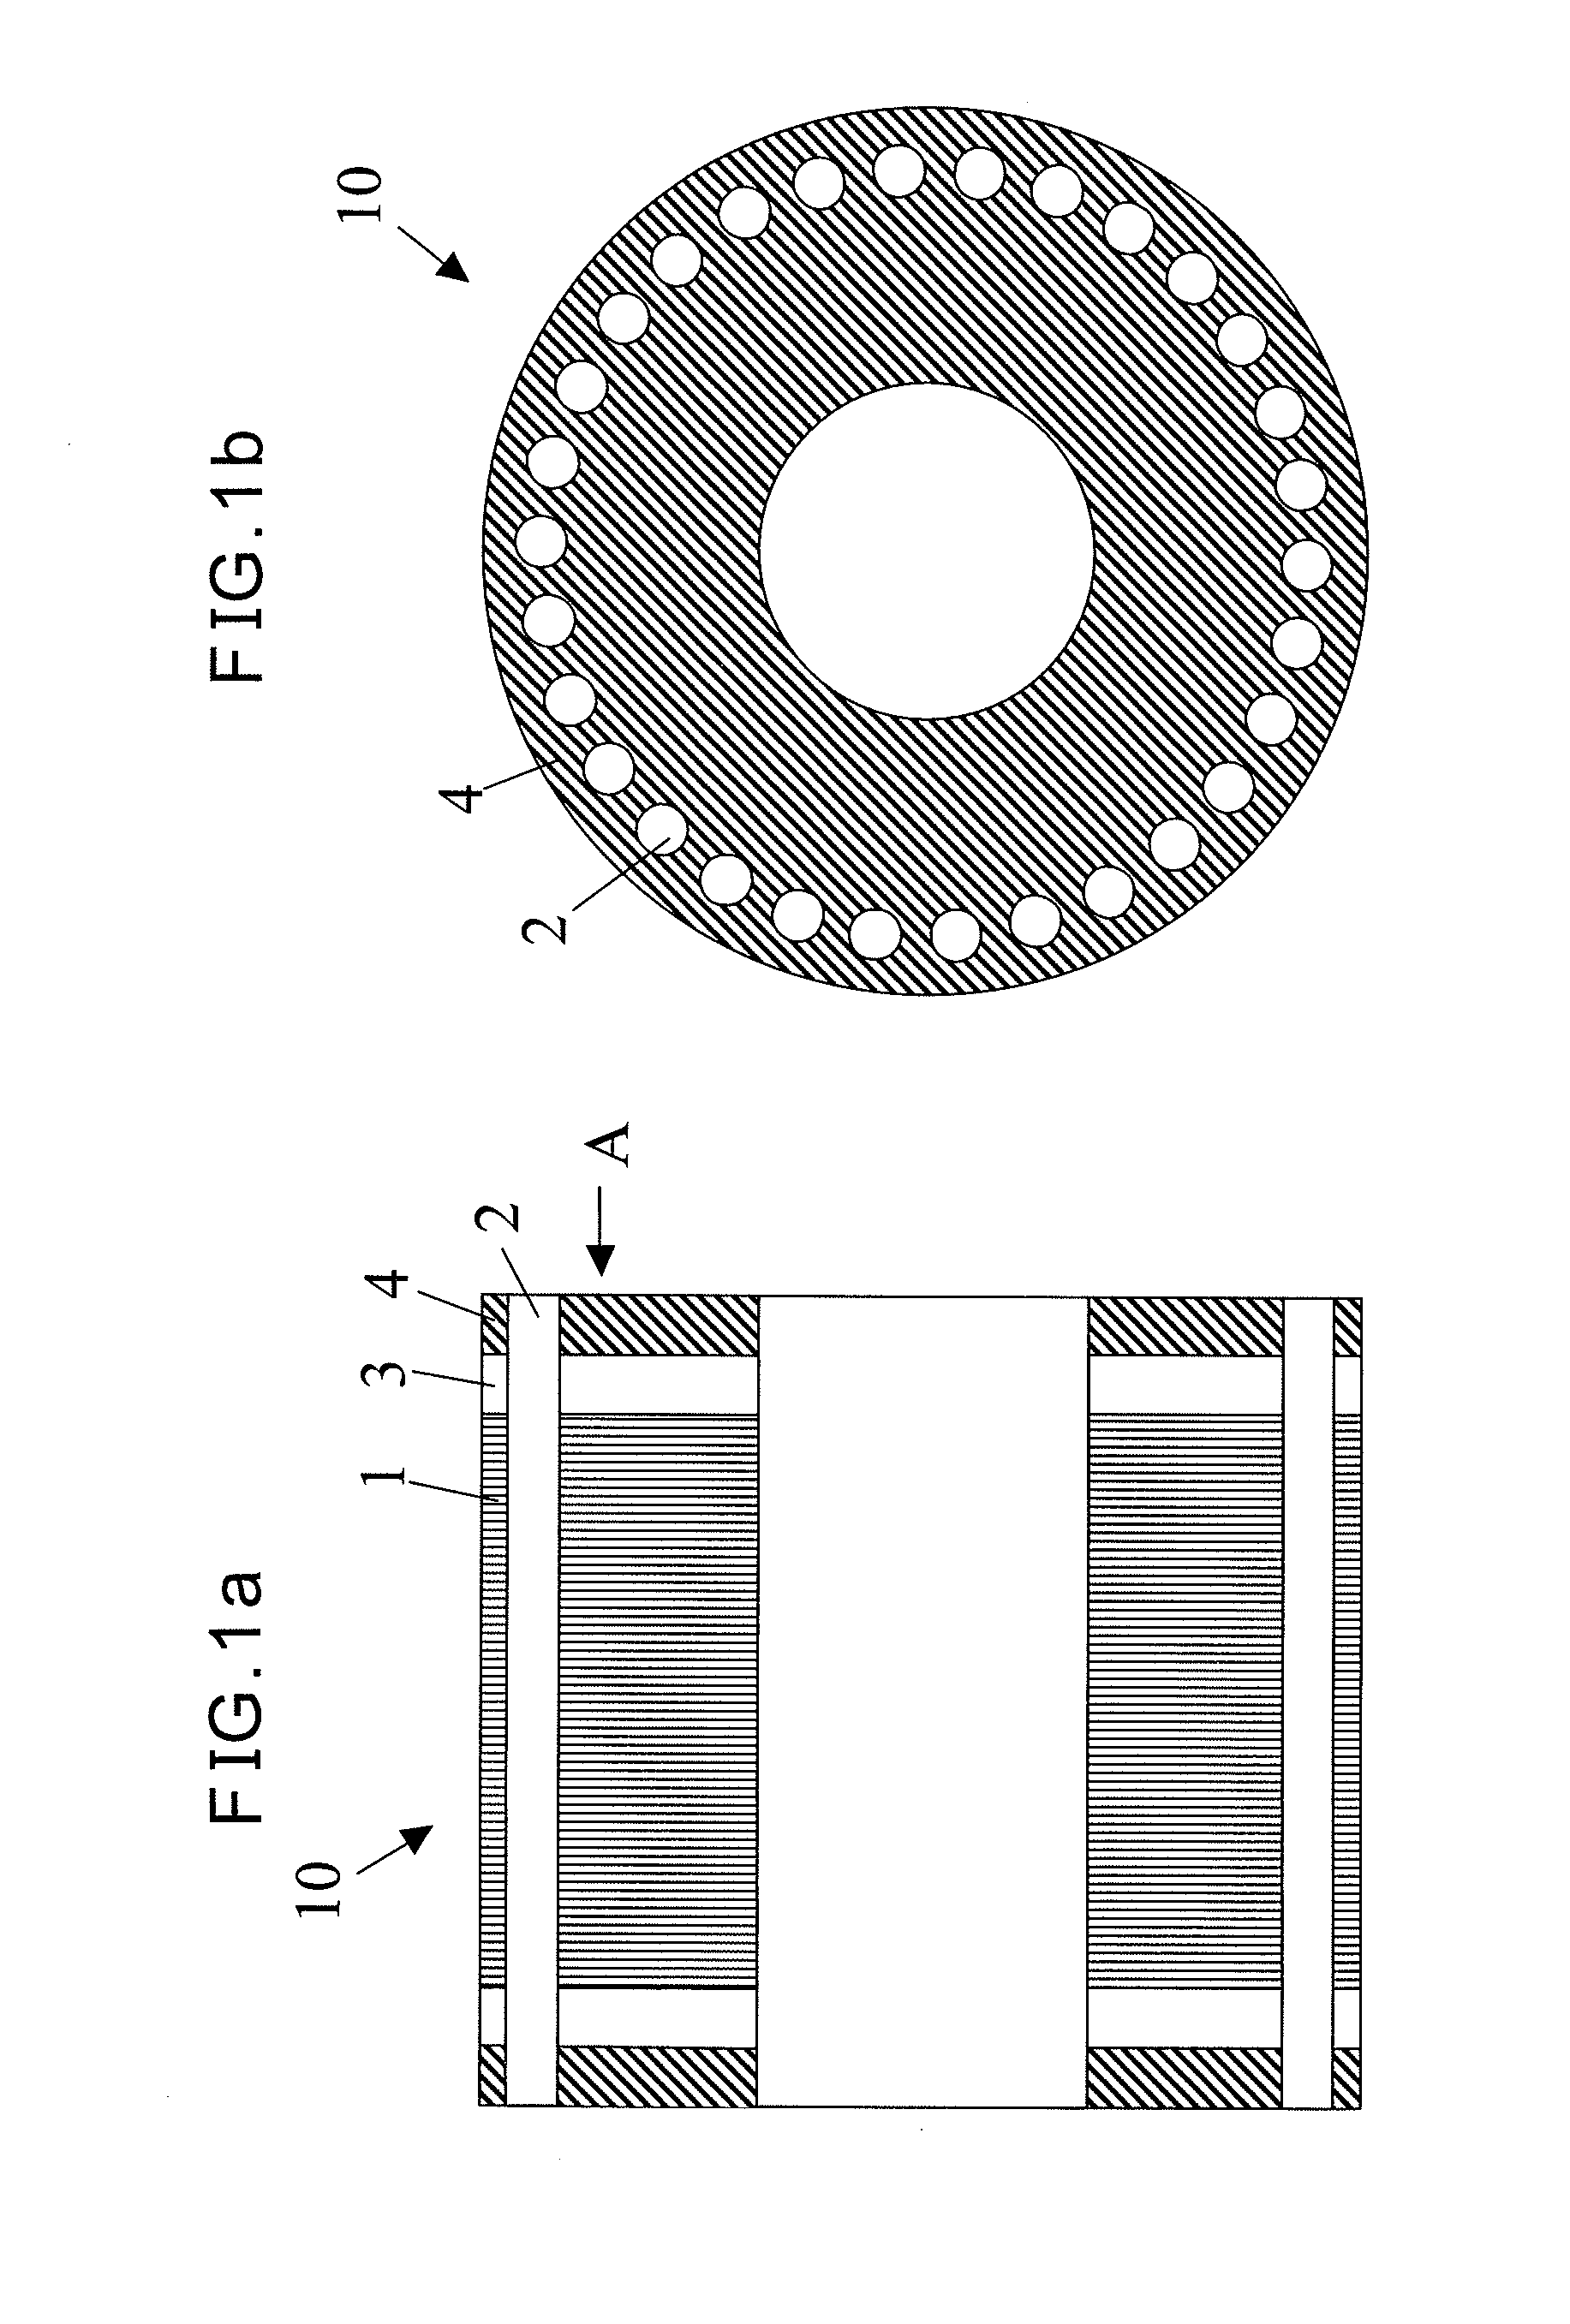 Squirrel-cage rotor for induction motor